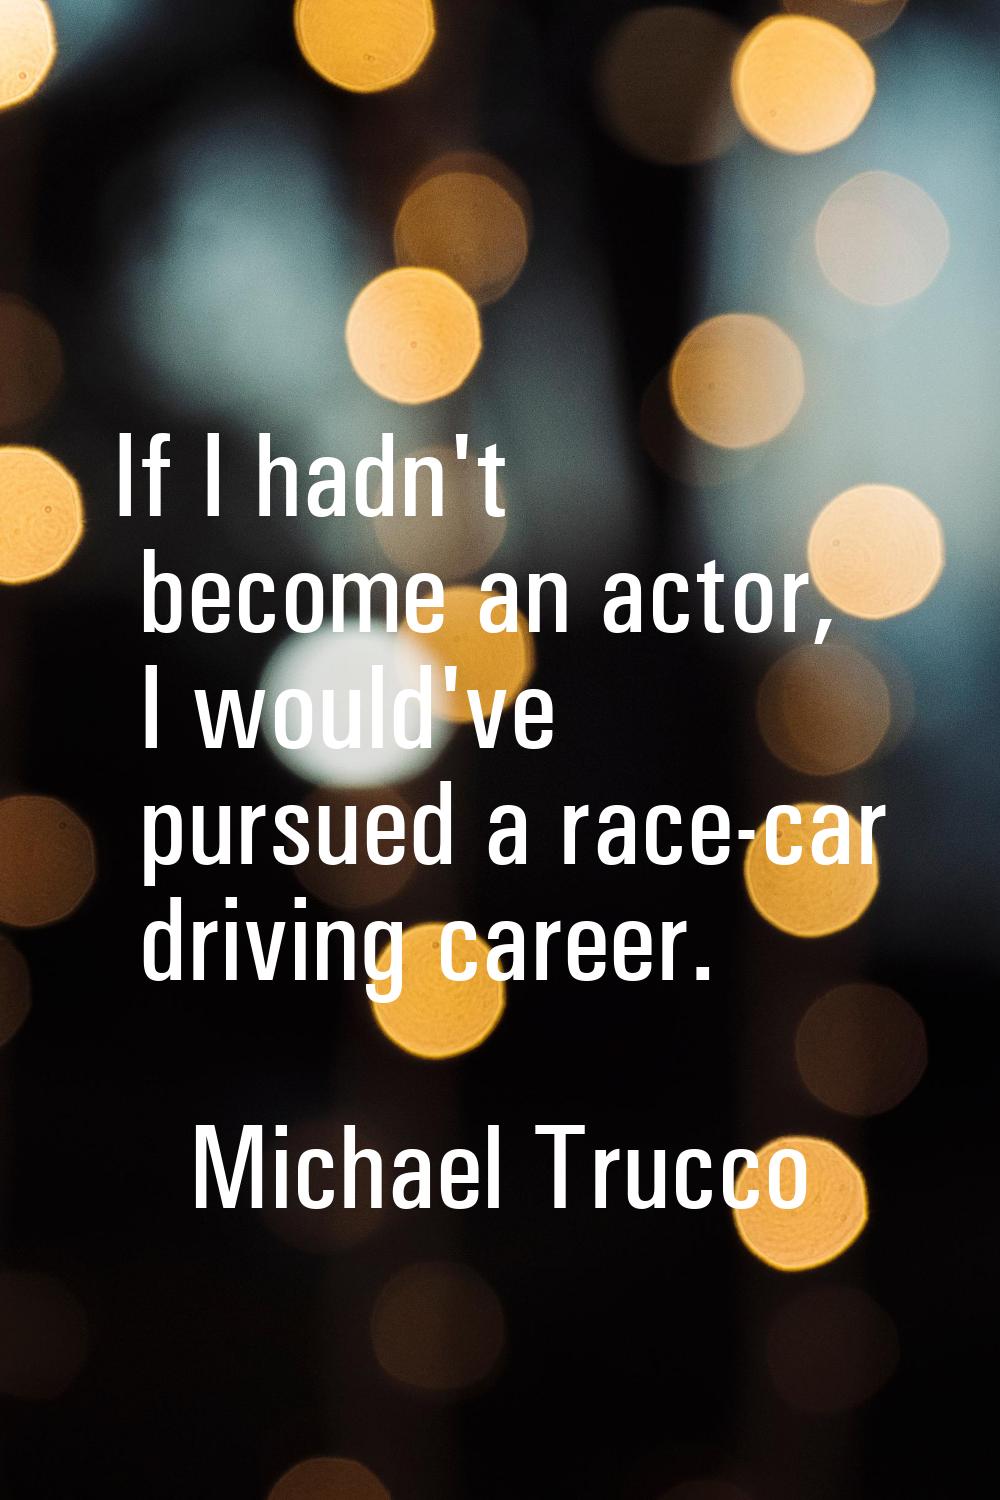 If I hadn't become an actor, I would've pursued a race-car driving career.